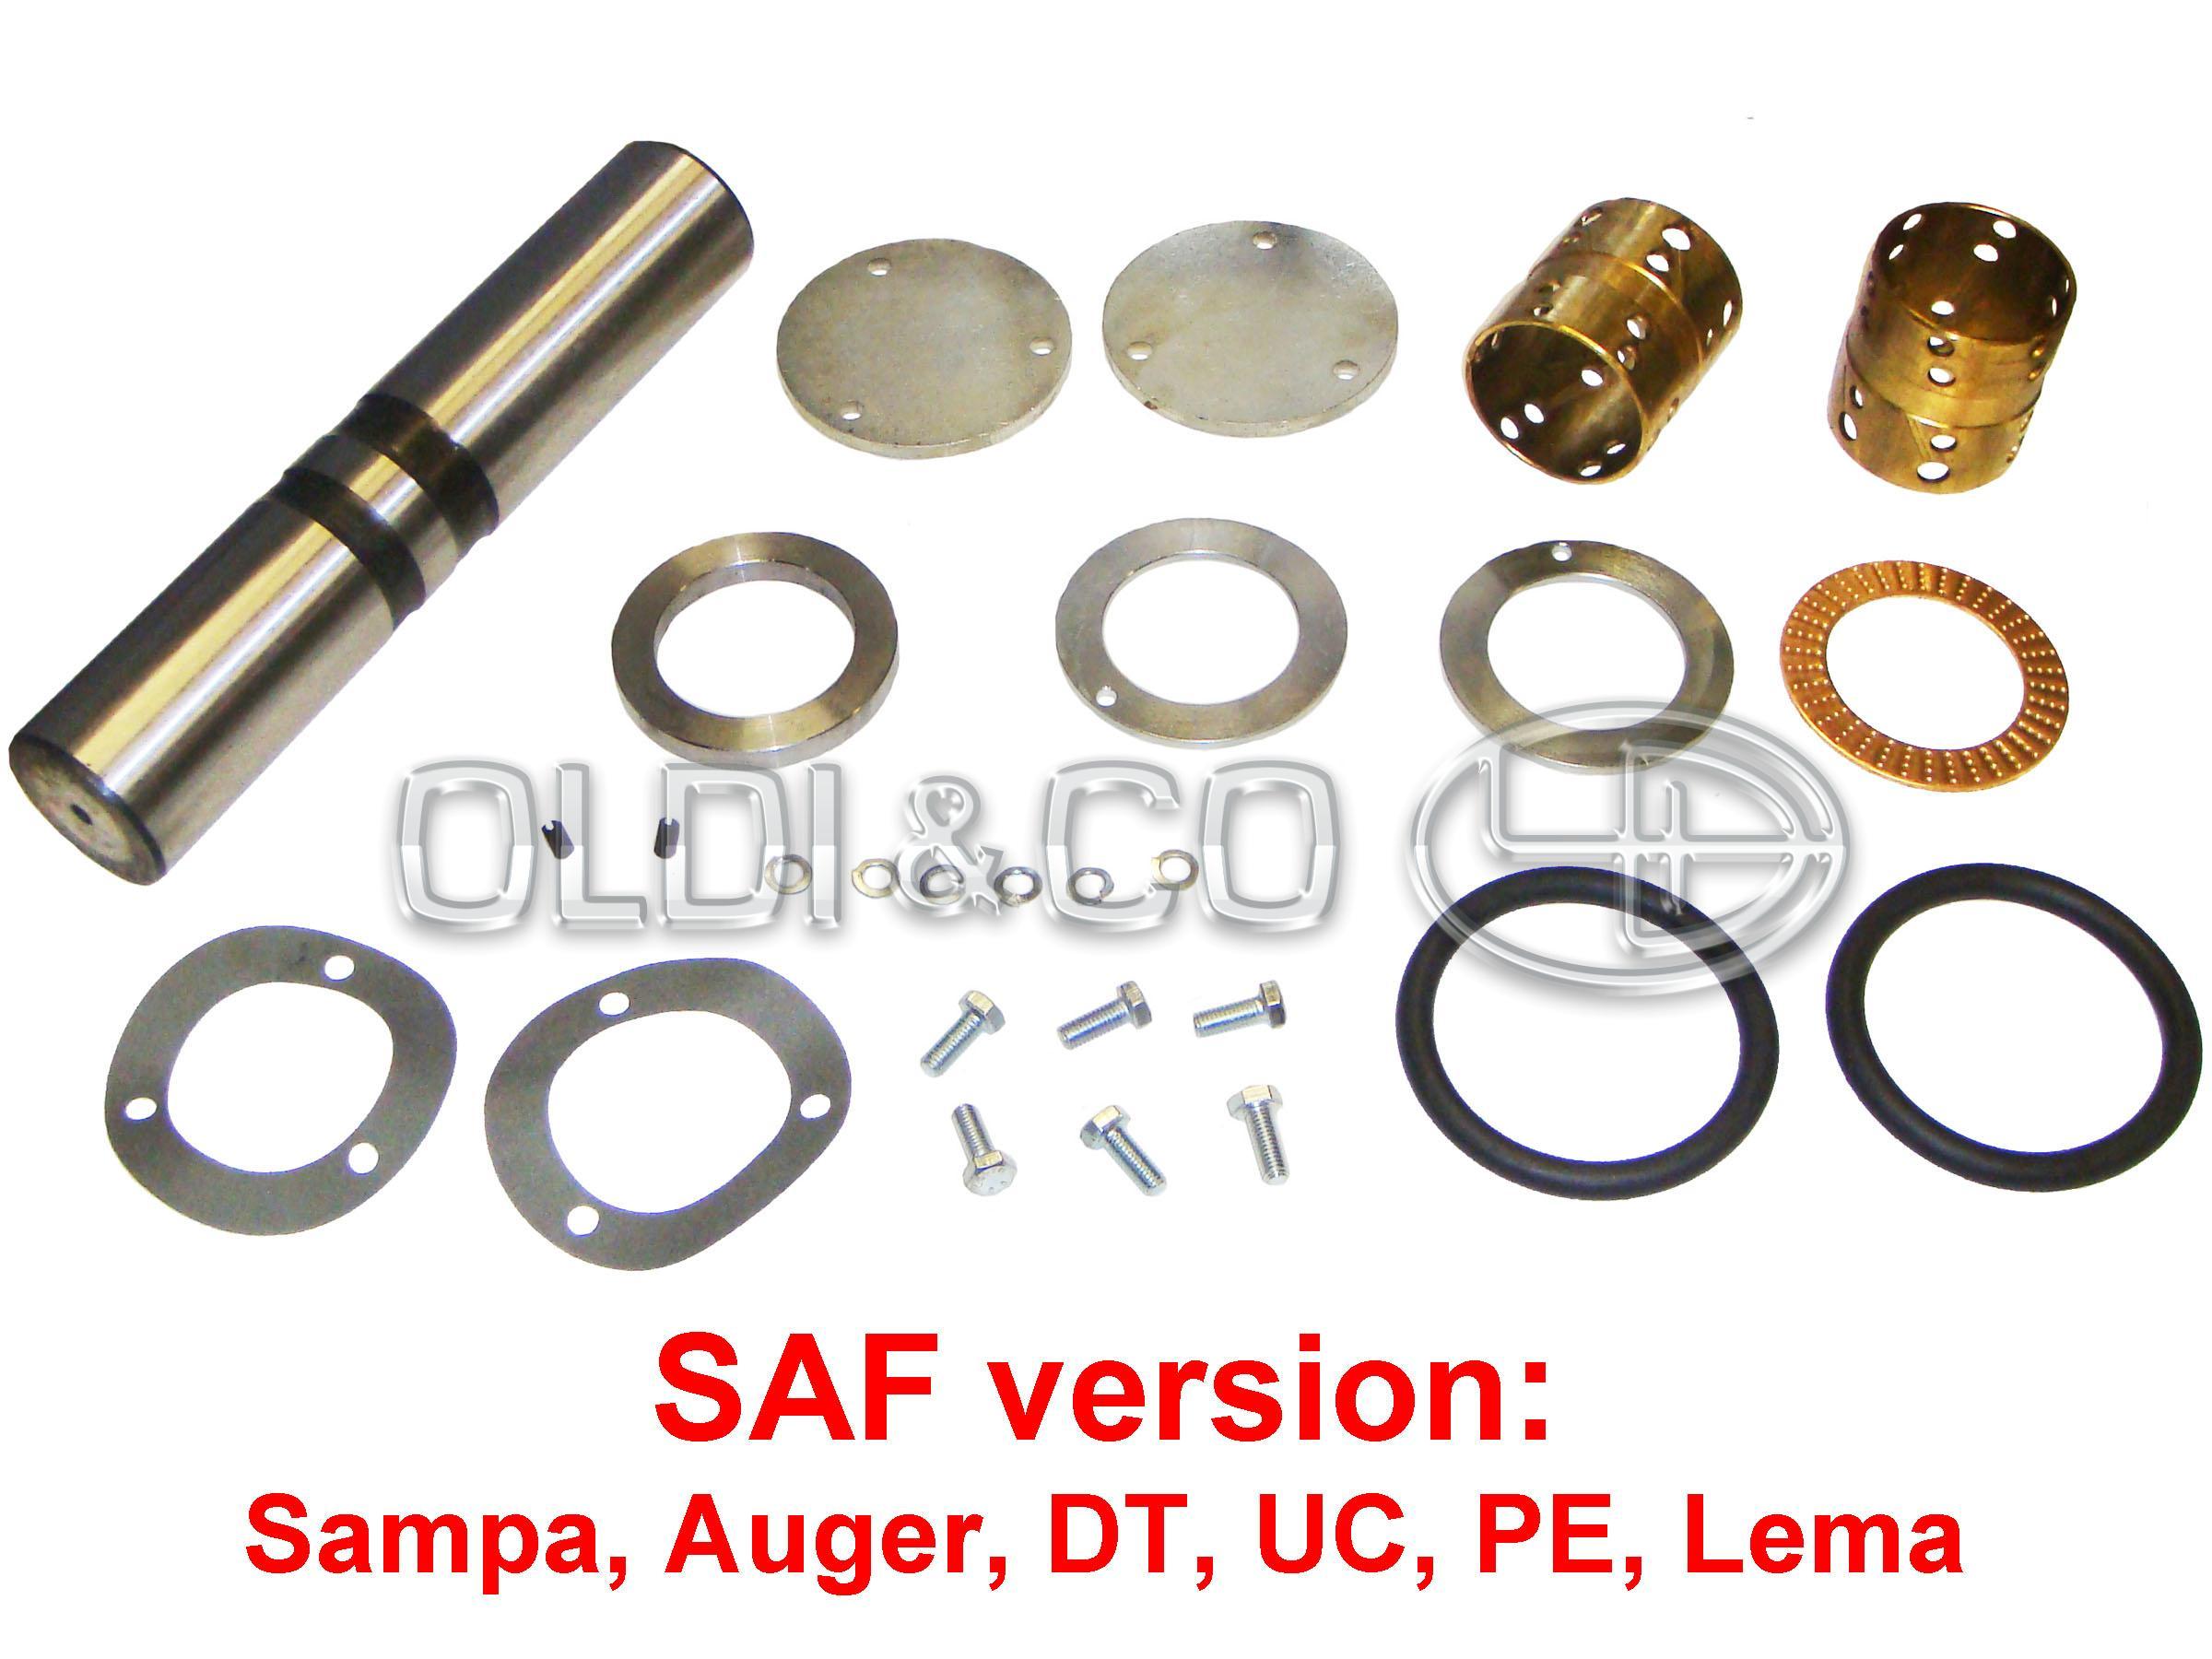 34.074.17269 Suspension parts → King pin - steering knuckle rep. kit